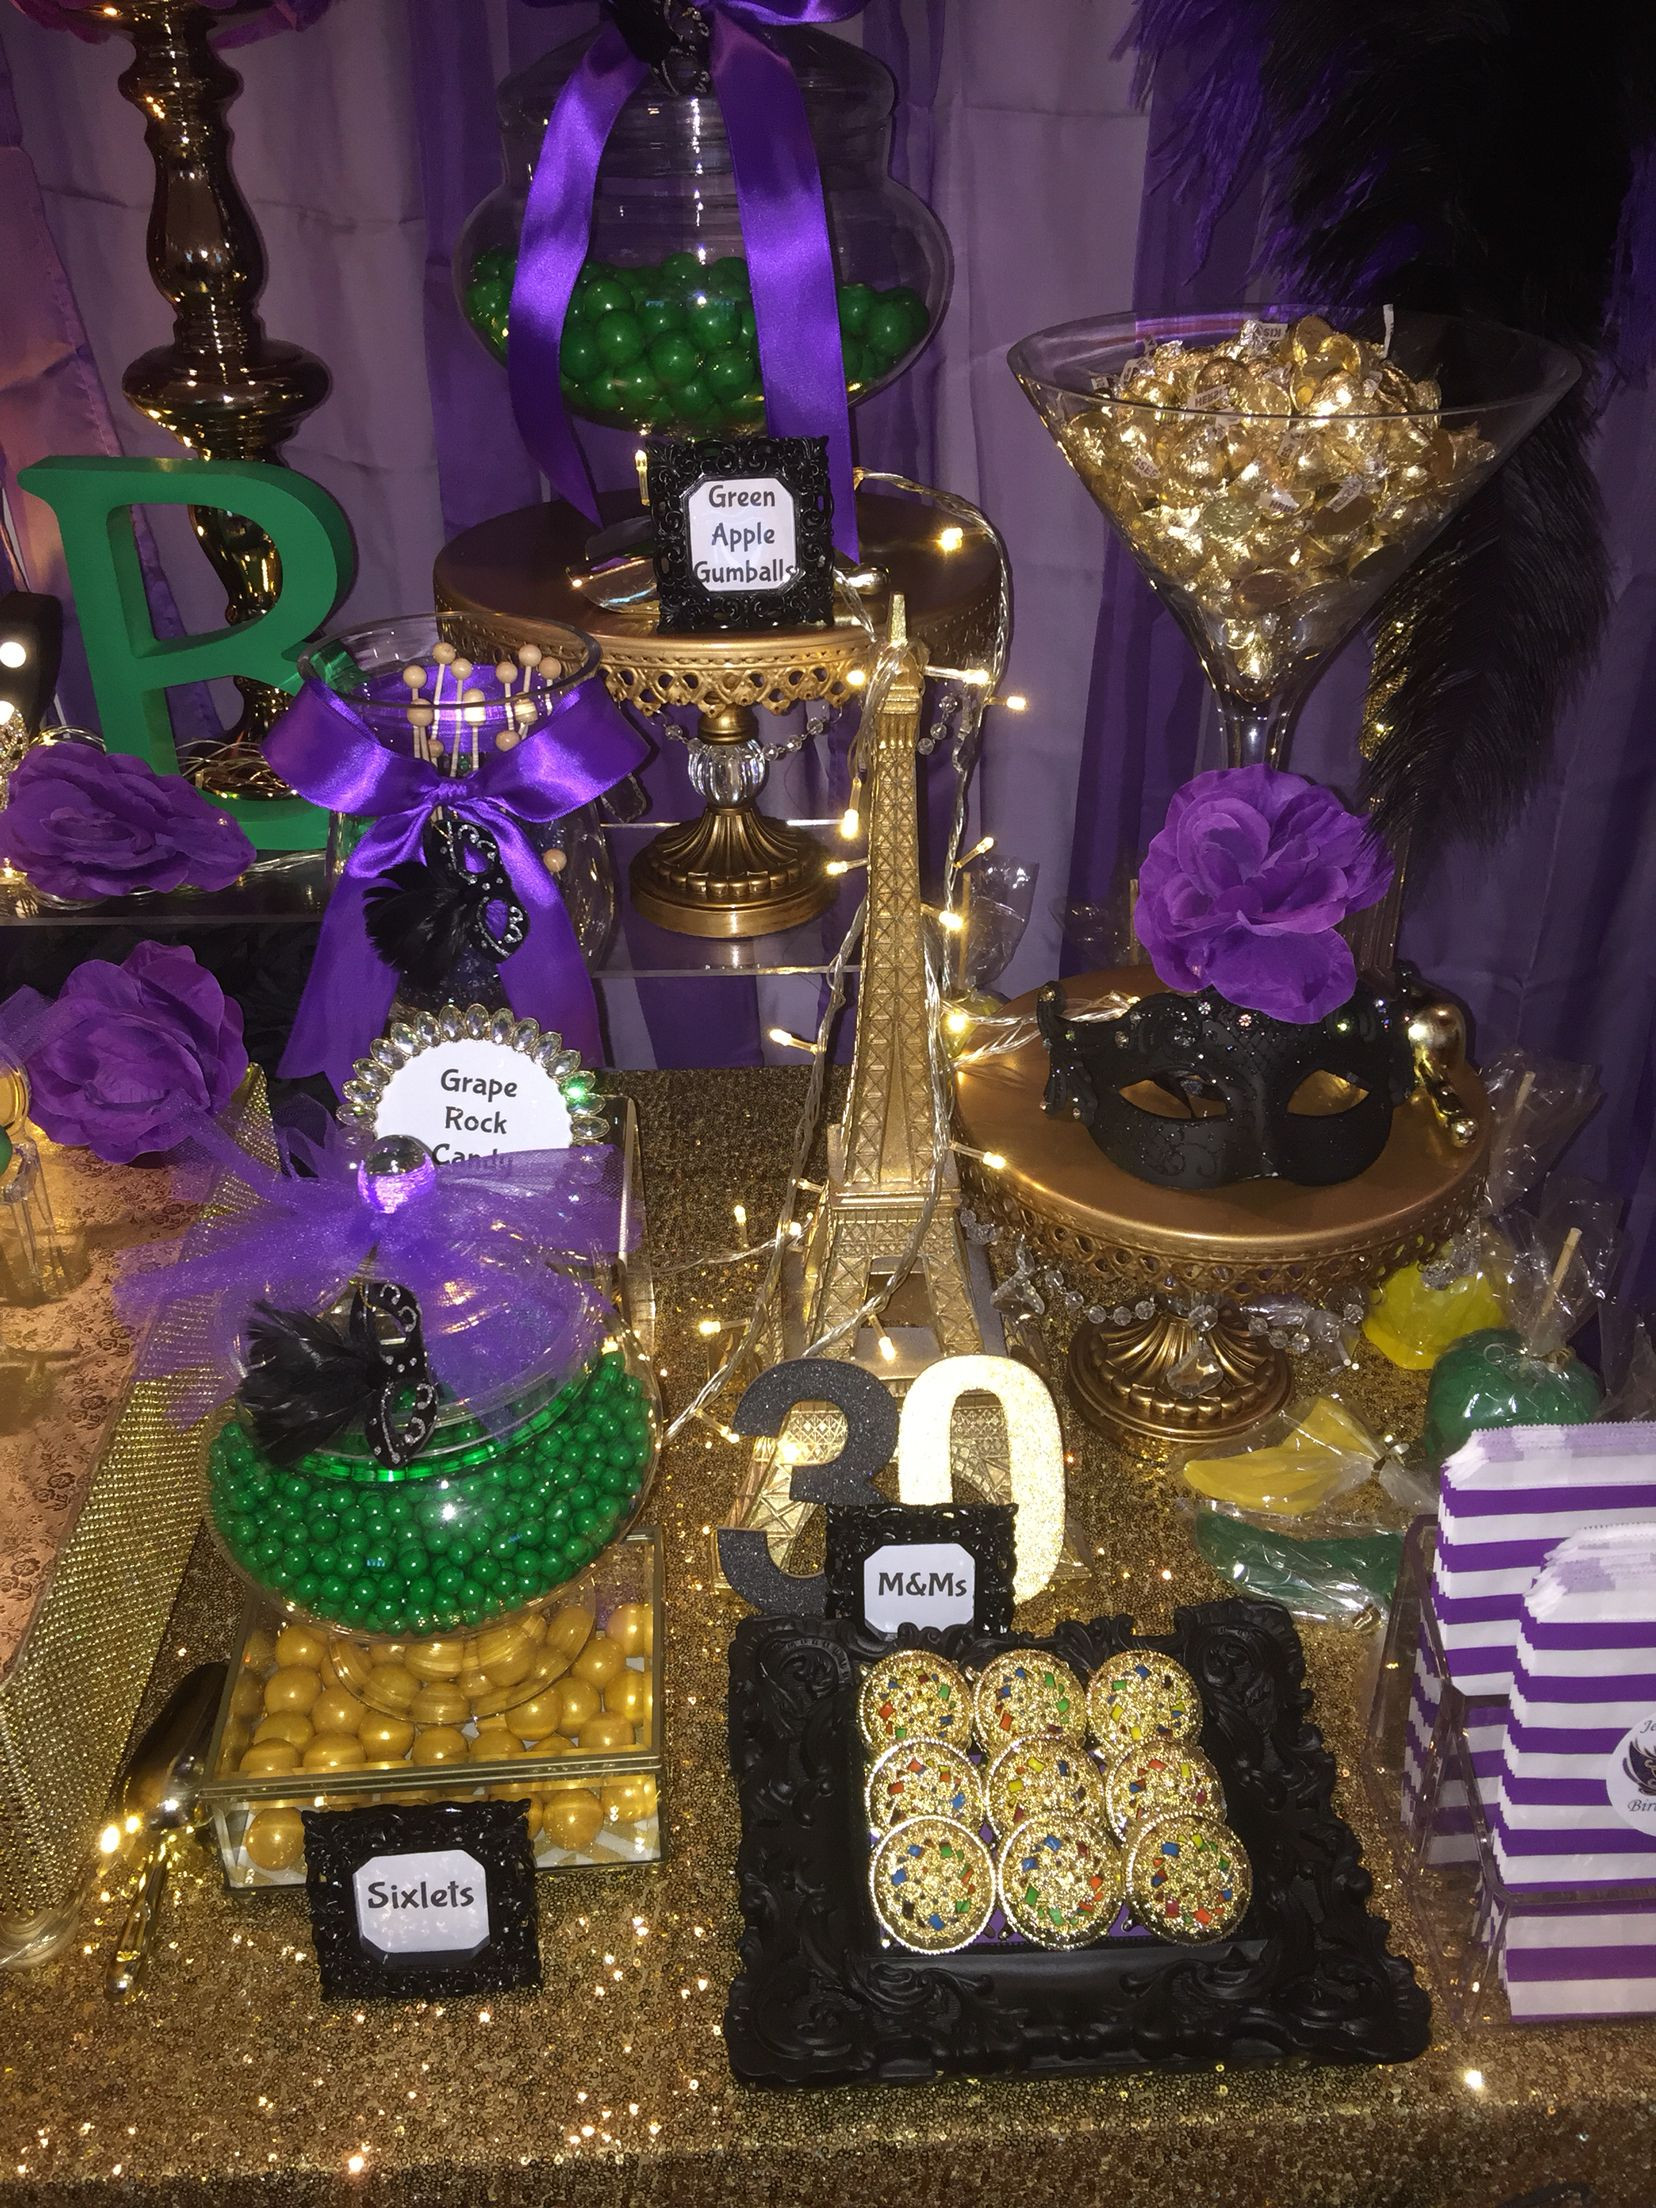 Masquerade Graduation Party Ideas
 Birthday Masquerade Party Candy Buffet in Purple Green